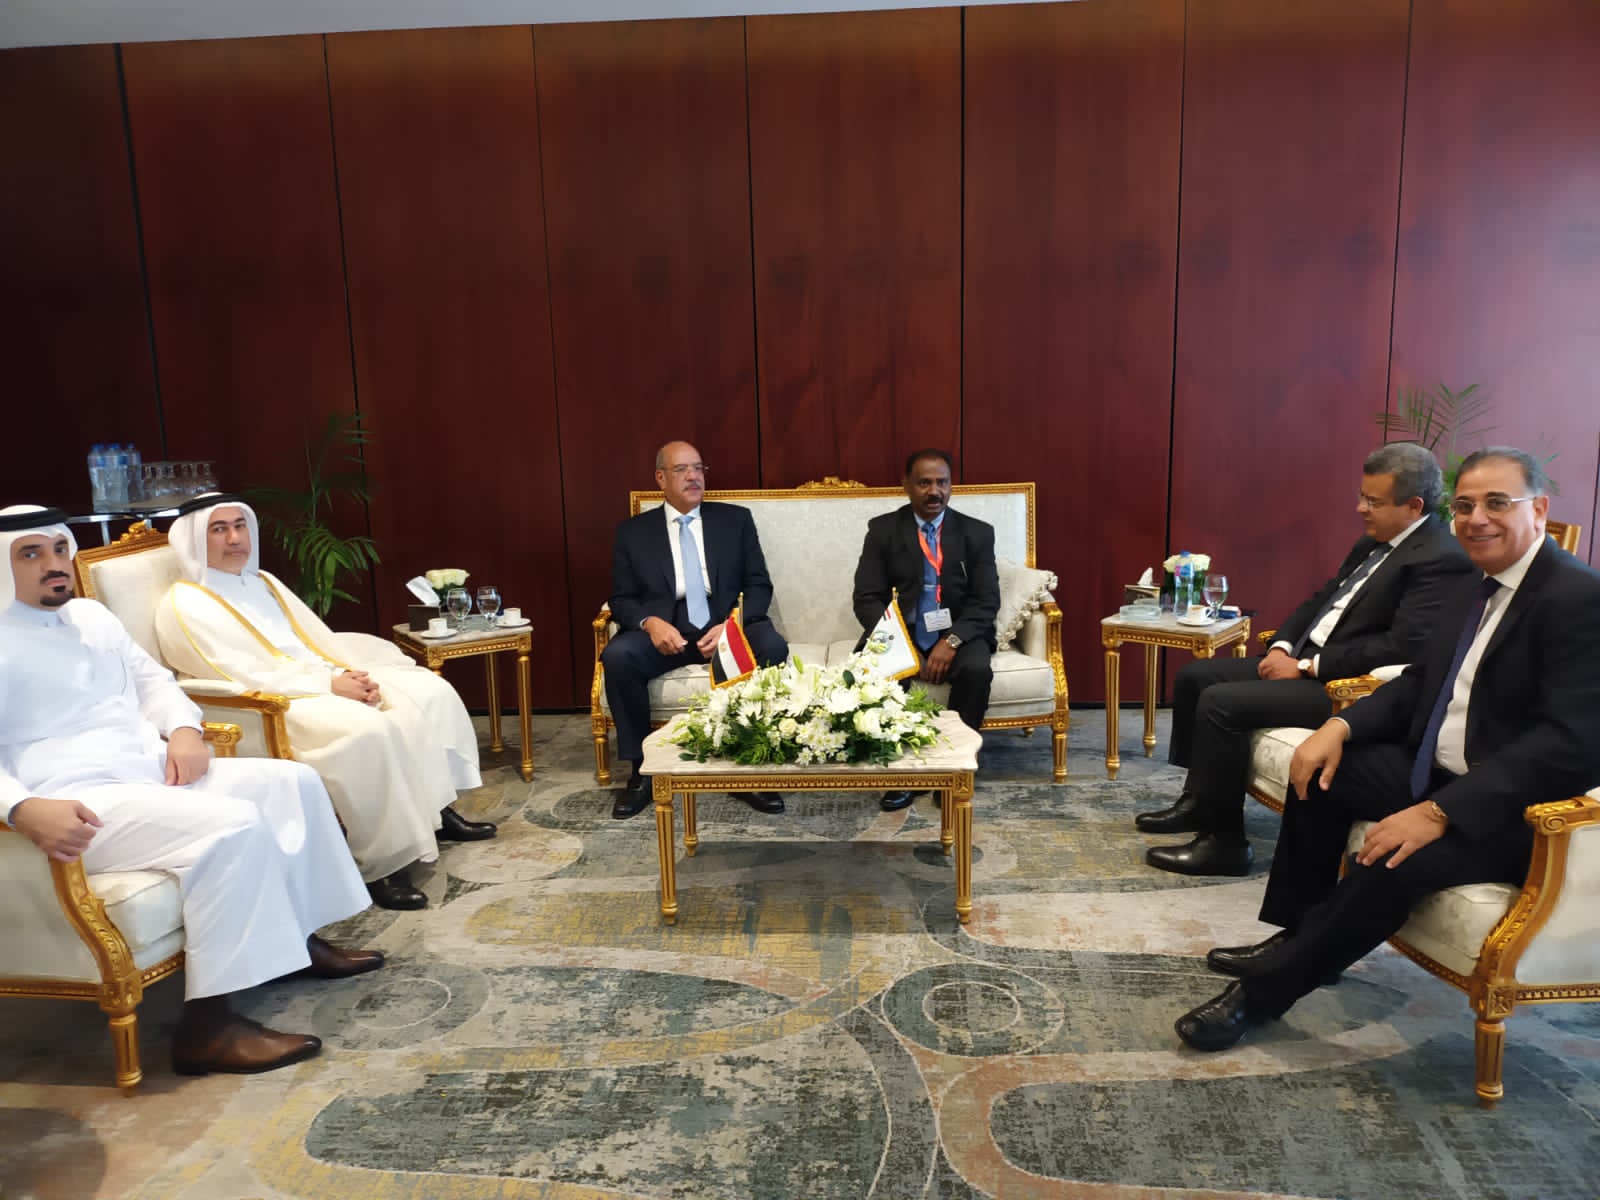 CAG of India, Sh. Girish Chandra Murmu in discussion with the President, Accountability State Authority of Egypt, H.E Counsellor Hesham Badawy and the President of the State Audit Bureau of Qatar, H.E. Dr. Abdulaziz Mohamed Al Emadi on the sidelines of the 14th KSC SC Meeting held in Cairo, Egypt from 12th to 14th September, 2022.